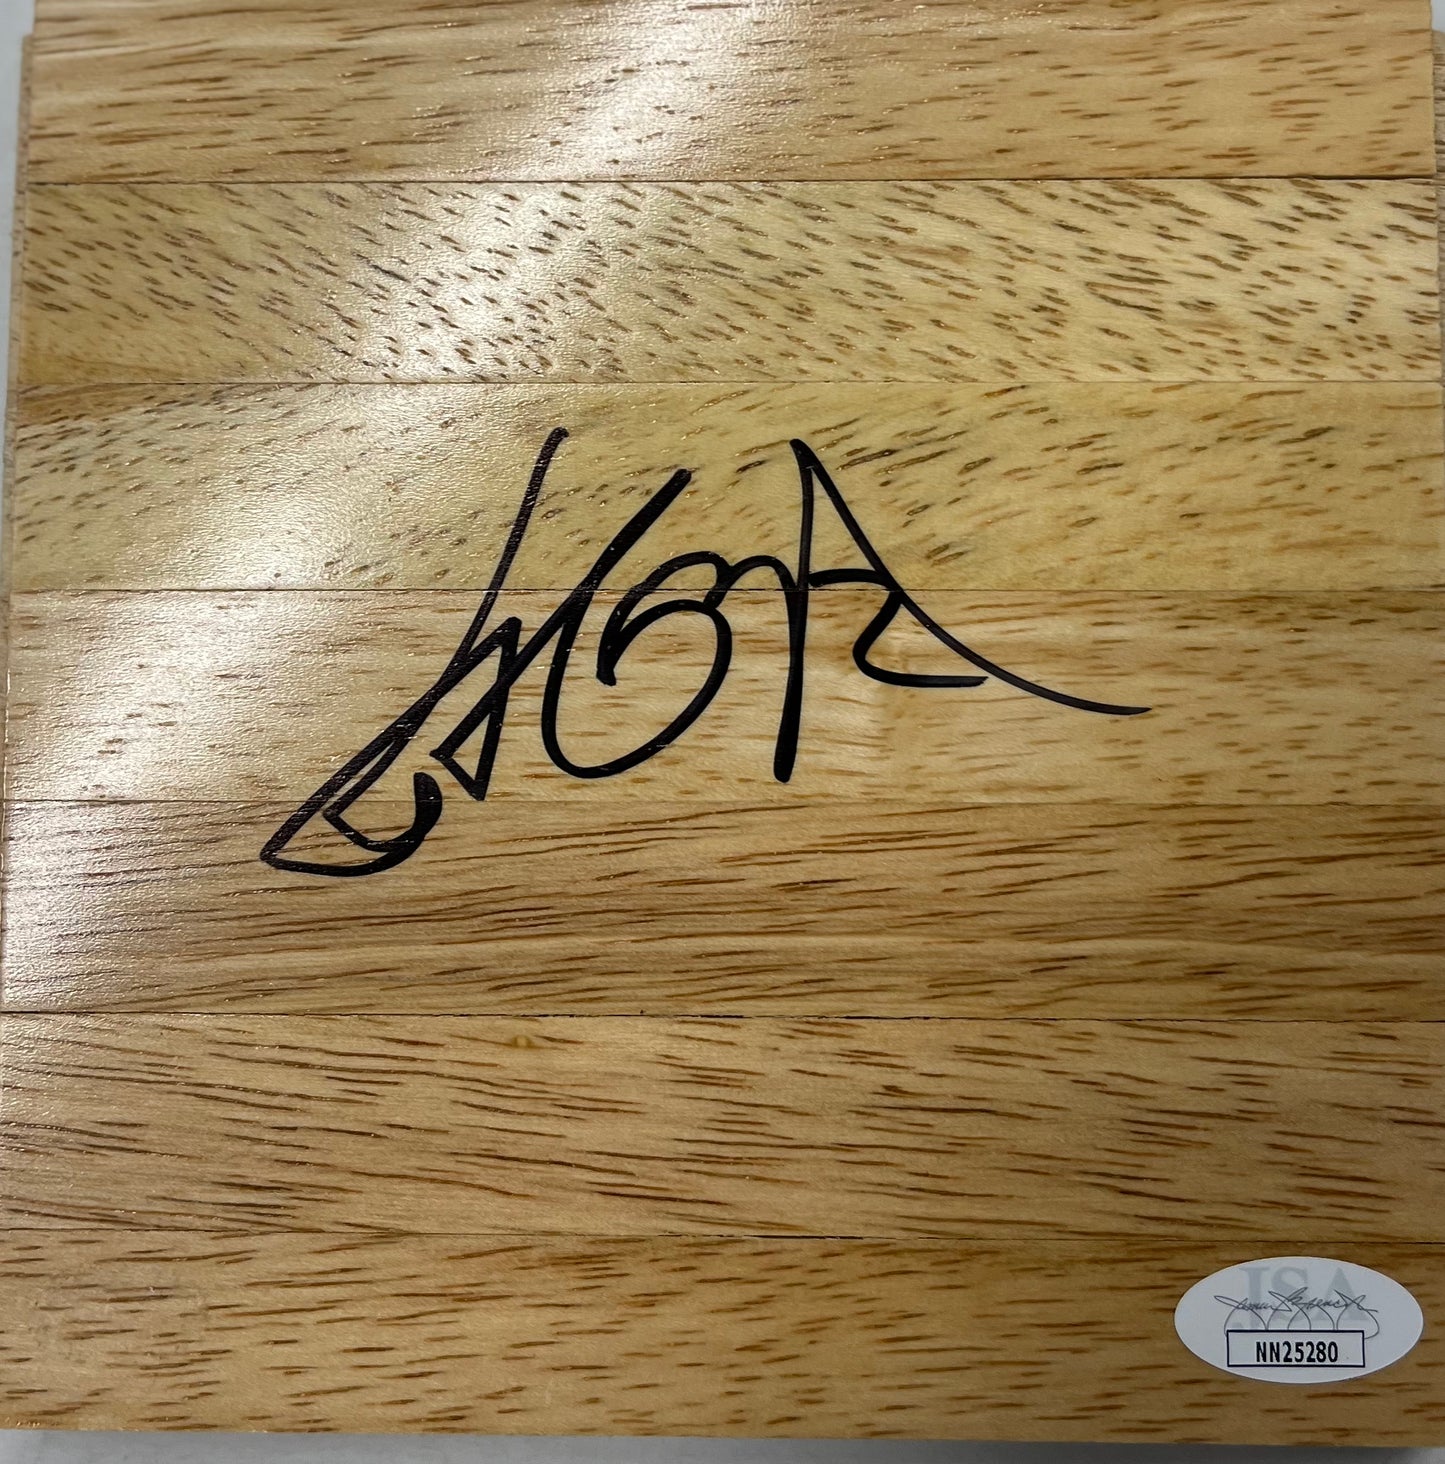 Rockets  Yao Ming  signed 6x6 floorboard   RARE